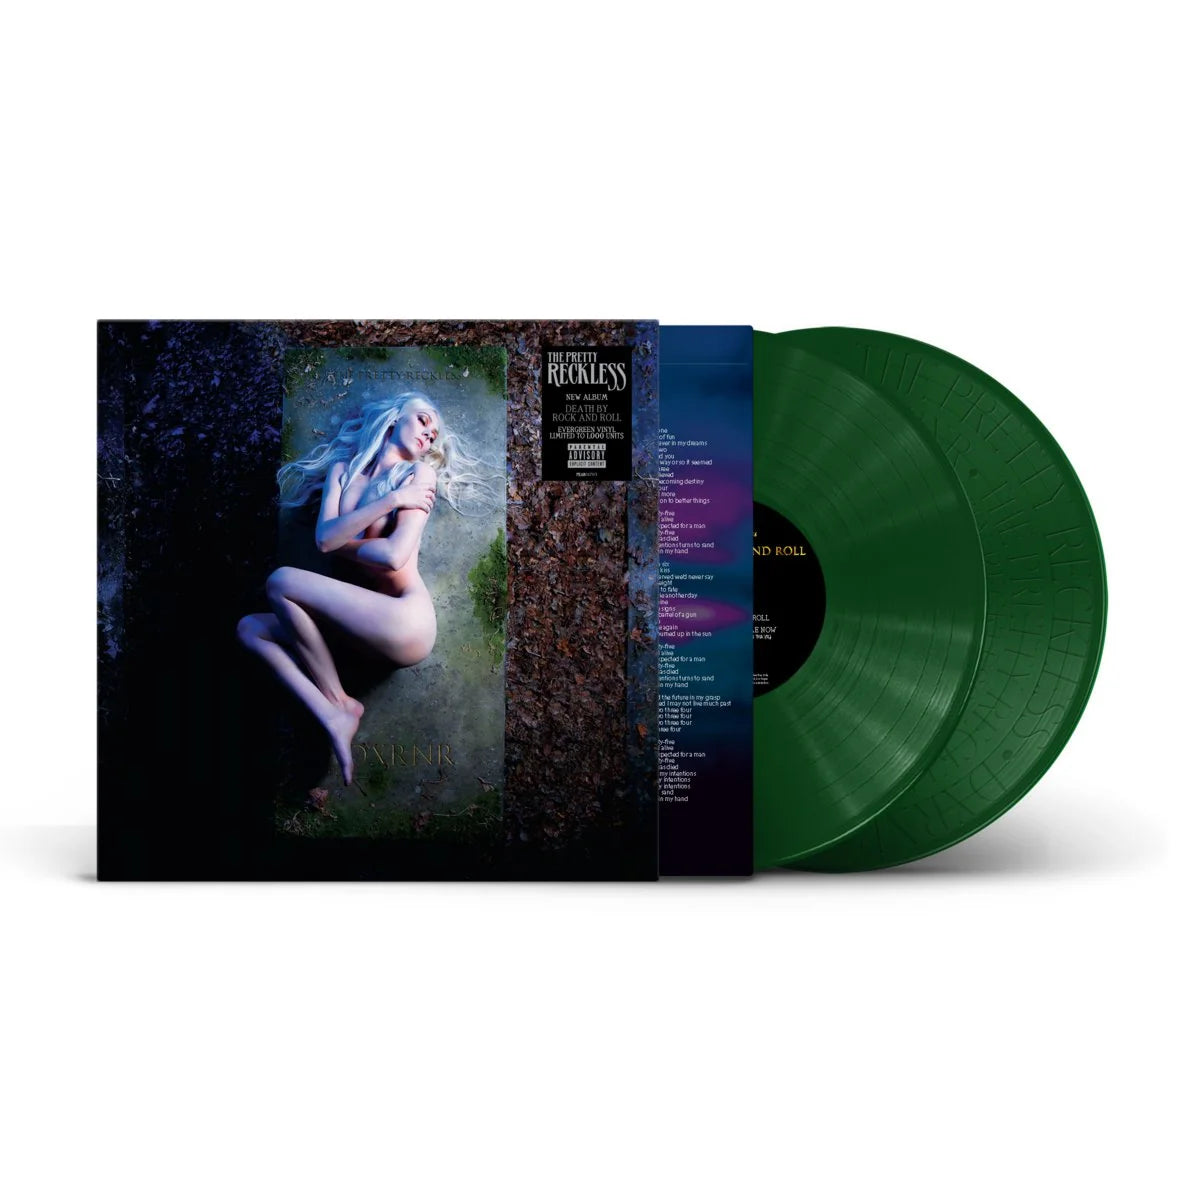 THE PRETTY RECKLESS - DEATH BY ROCK AND ROLL - LTD EDITION / CD / DARK GREEN VINYL